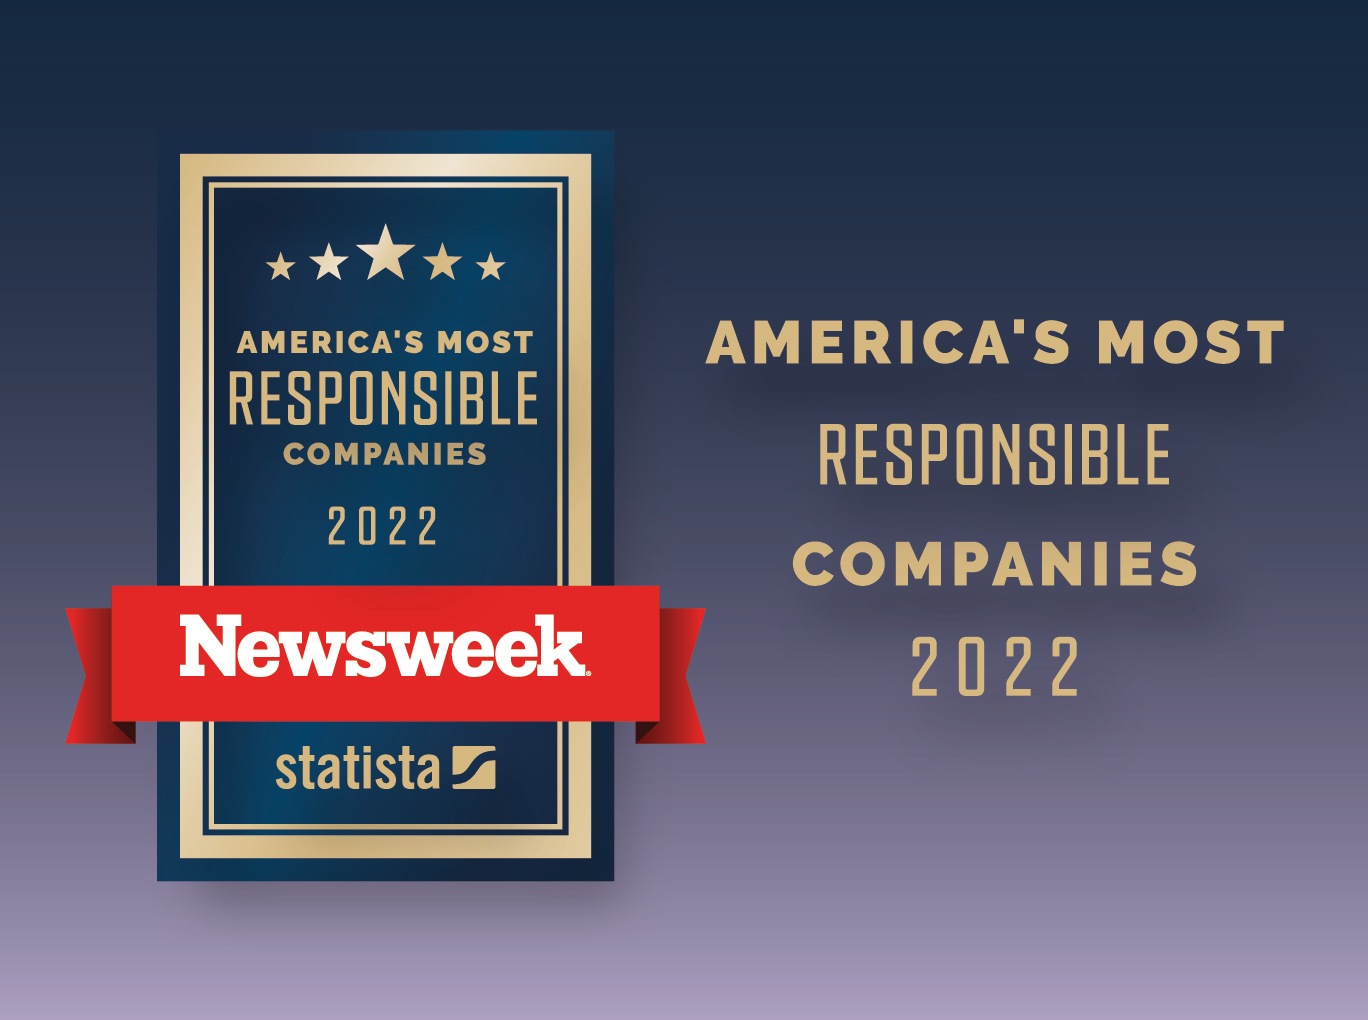 Newsweek Award for Caleres debuting at #68 in the America's Most Responsible Companies list for 2022